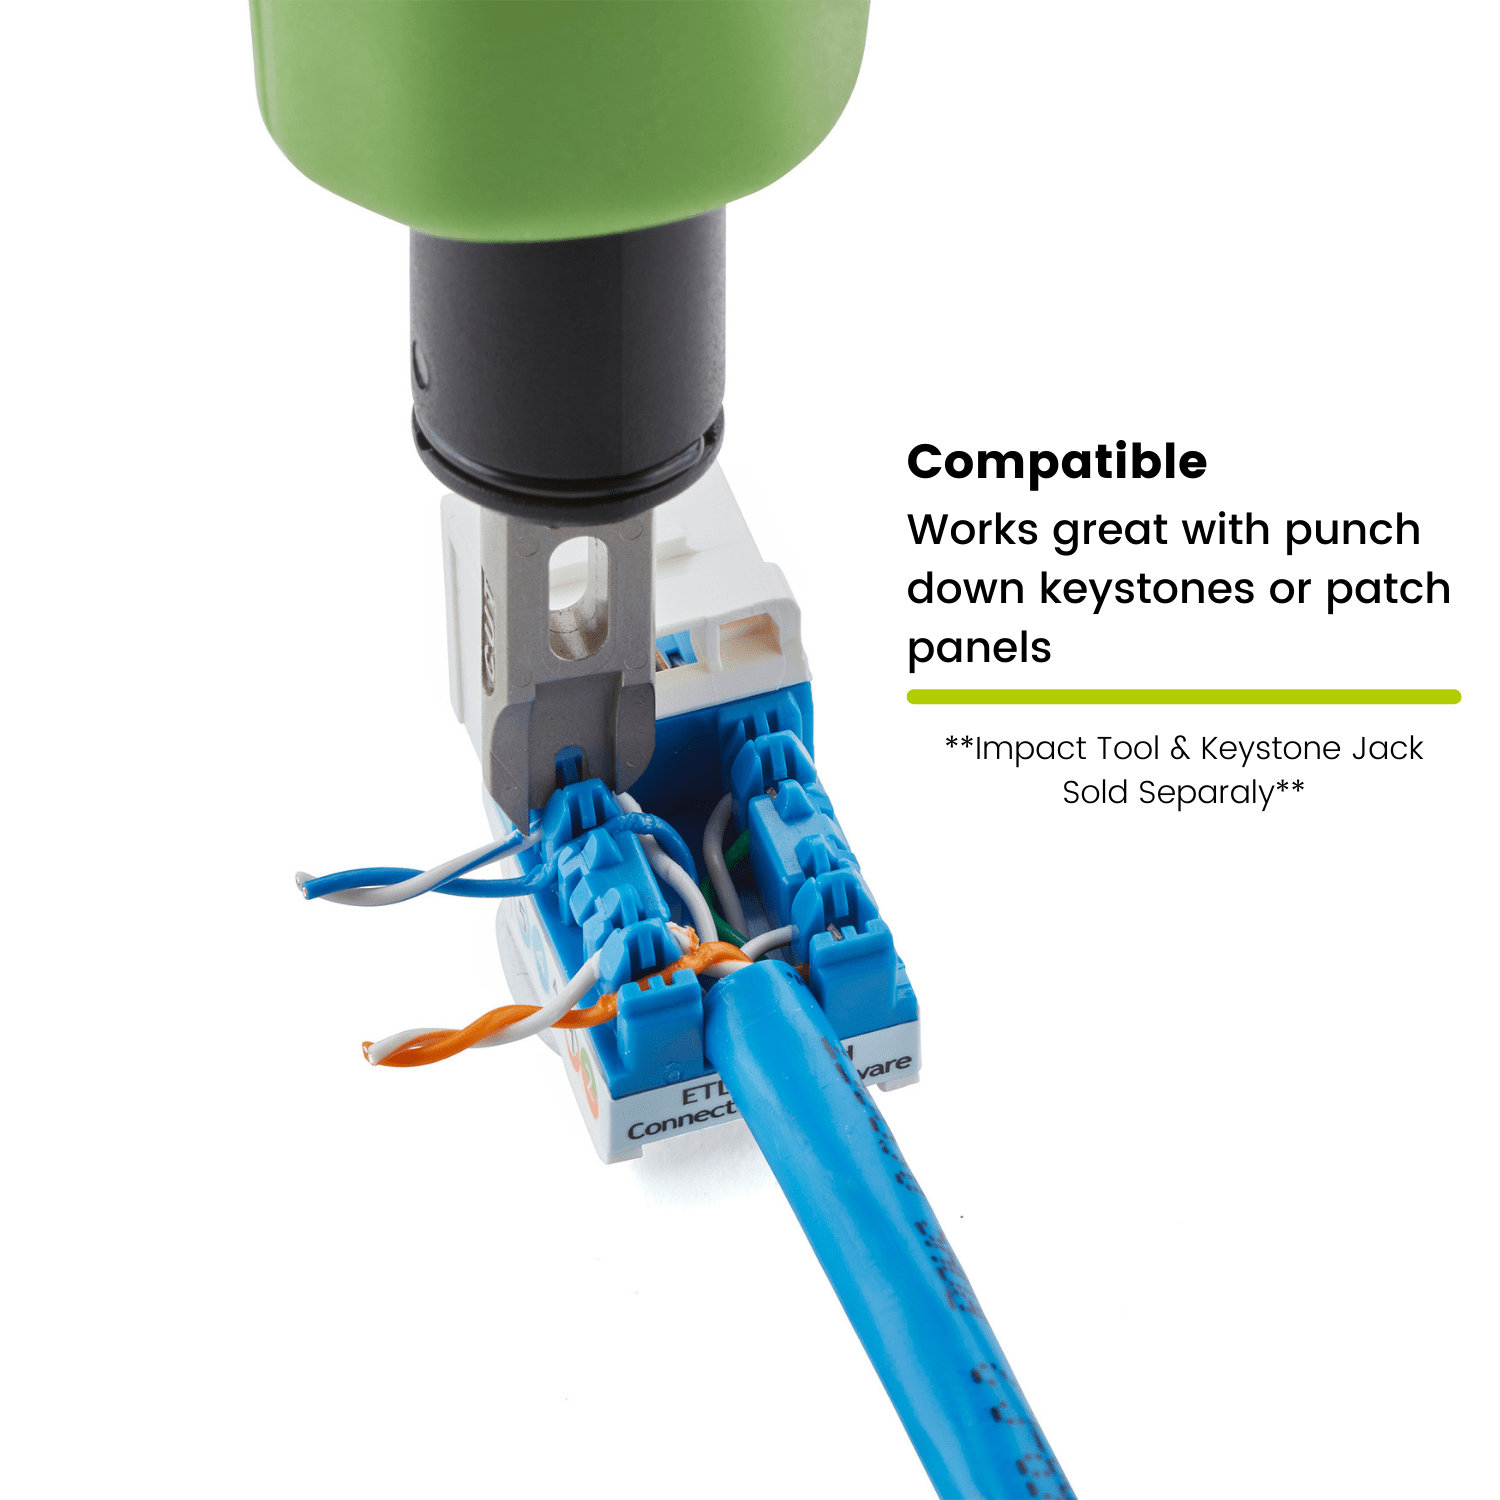 Introducing: trueIMPACT 110 Punch Down Tool